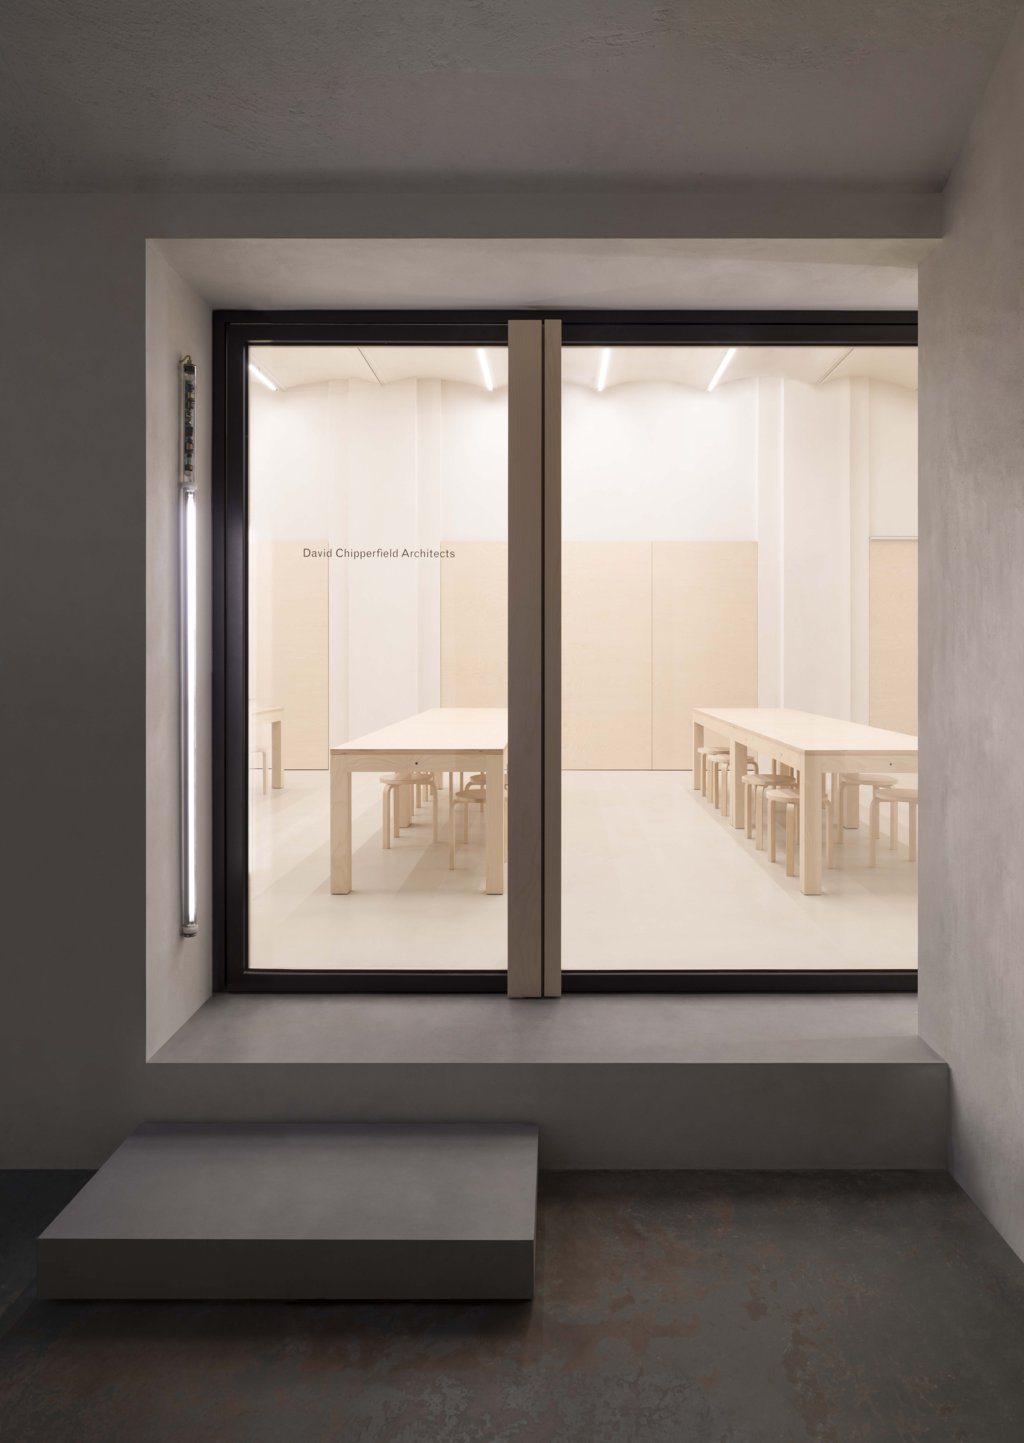 David Chipperfield Architects Milan office, the Atelier from the outside.